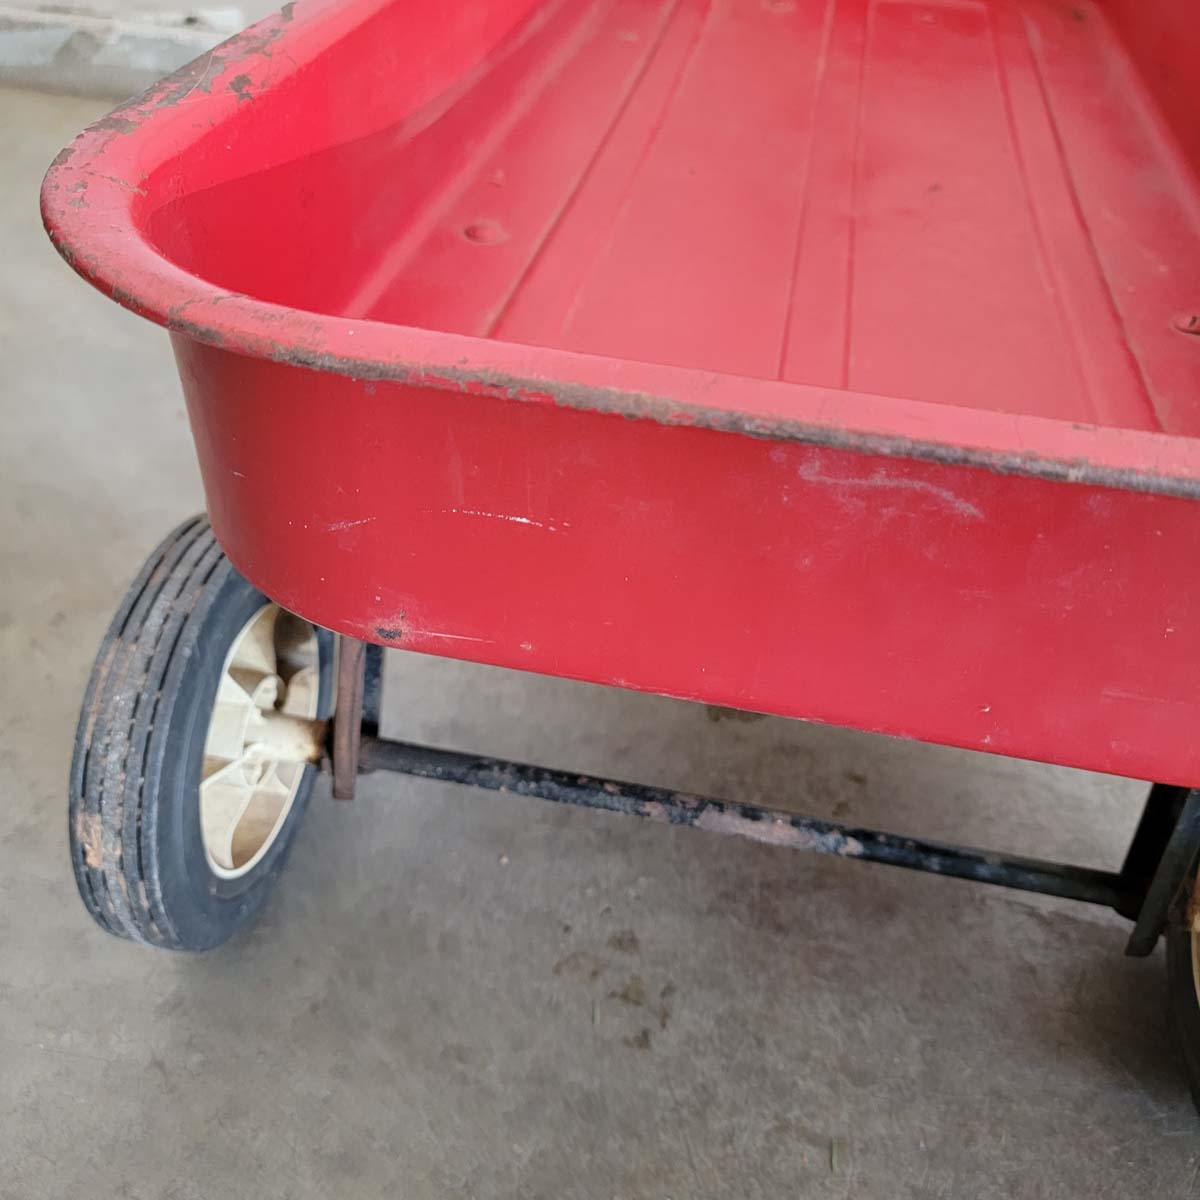 Radio Flyer Model 89 Little Red Wagon - Steel | Armstrong Family